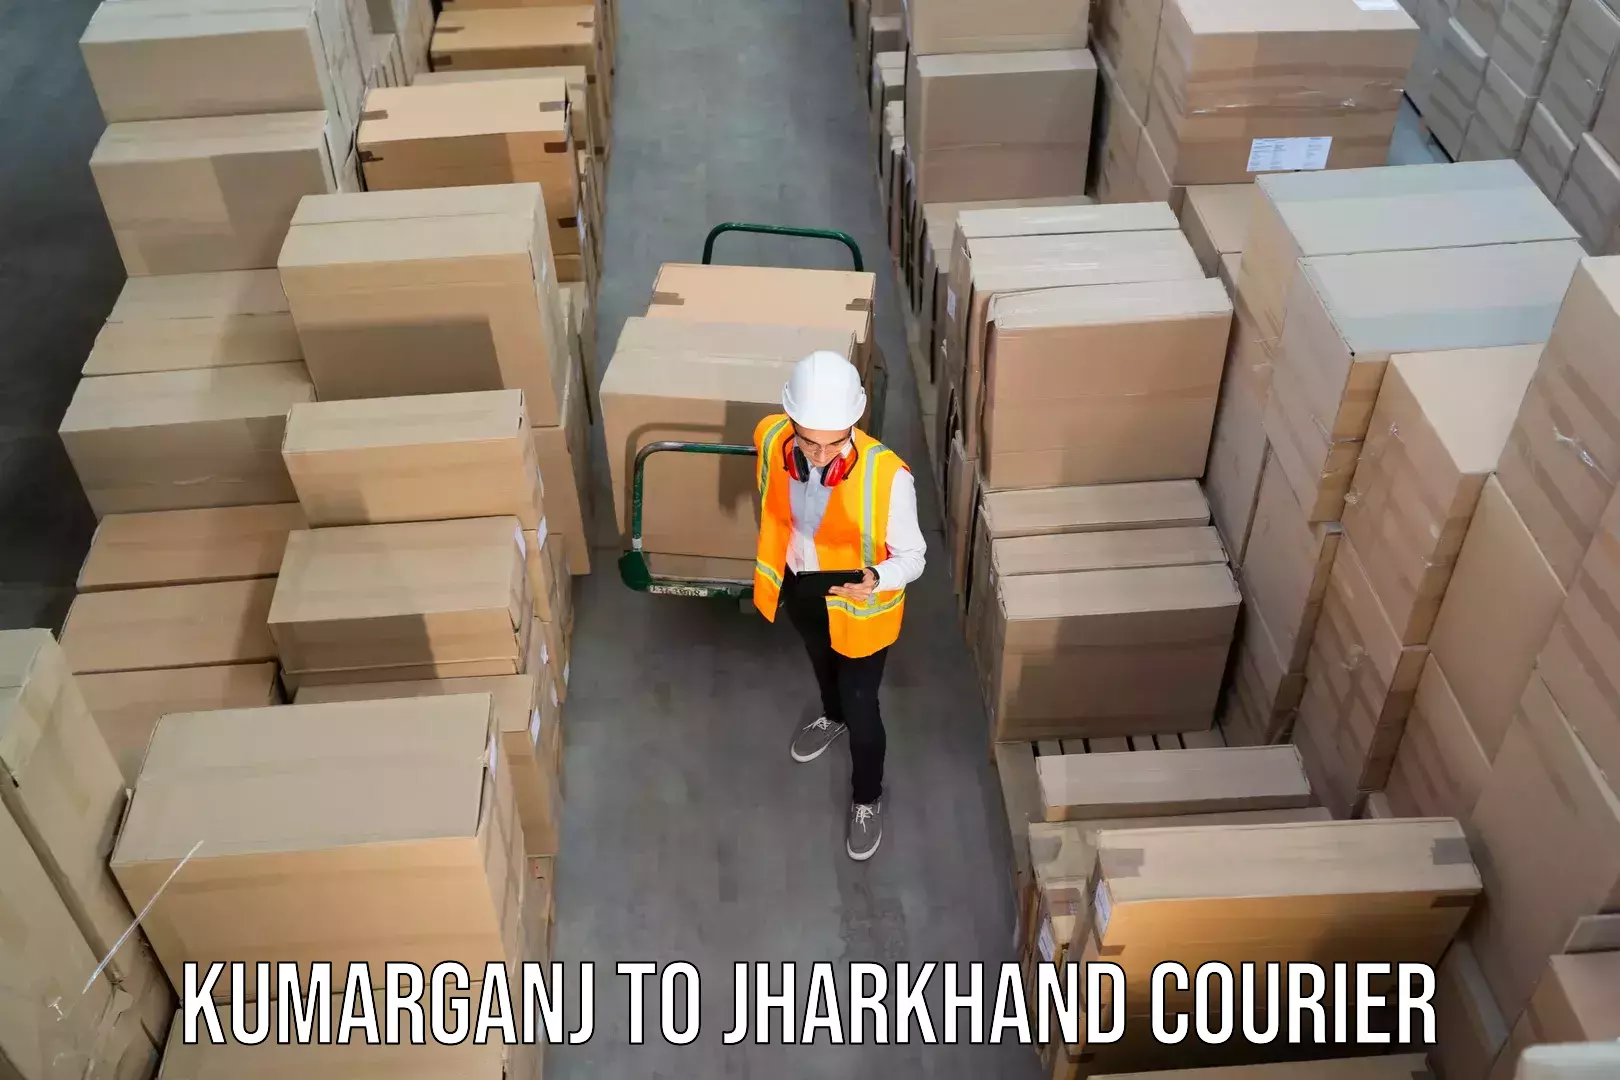 State-of-the-art courier technology Kumarganj to Jharkhand